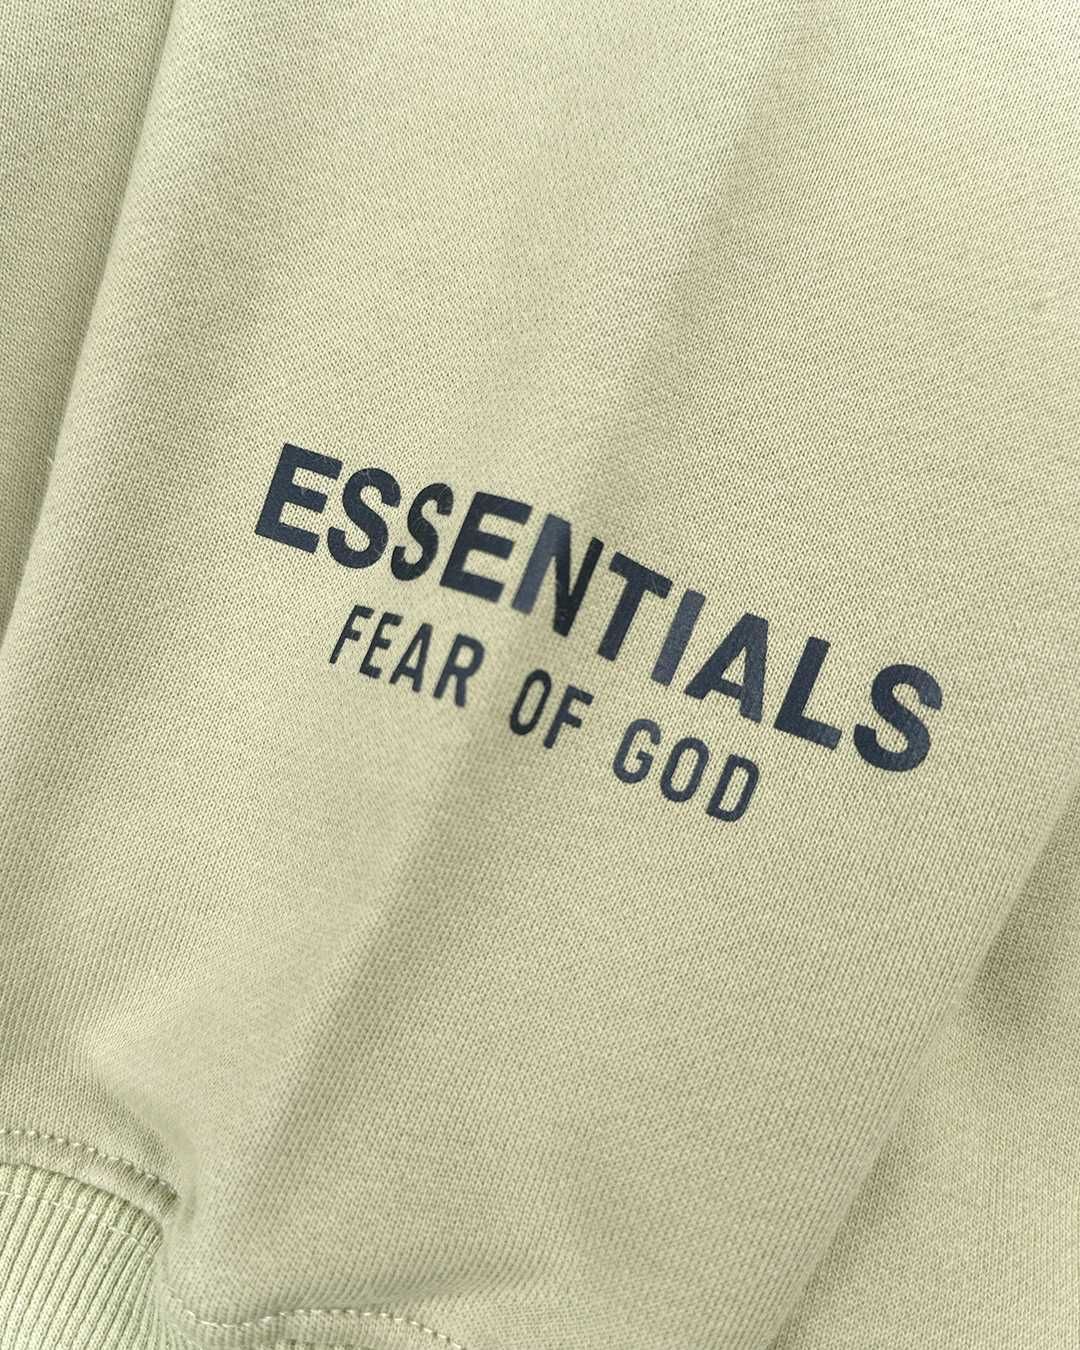 Fear of God Essentials Core Collection Pullover Hoodie Alfalfa Sage